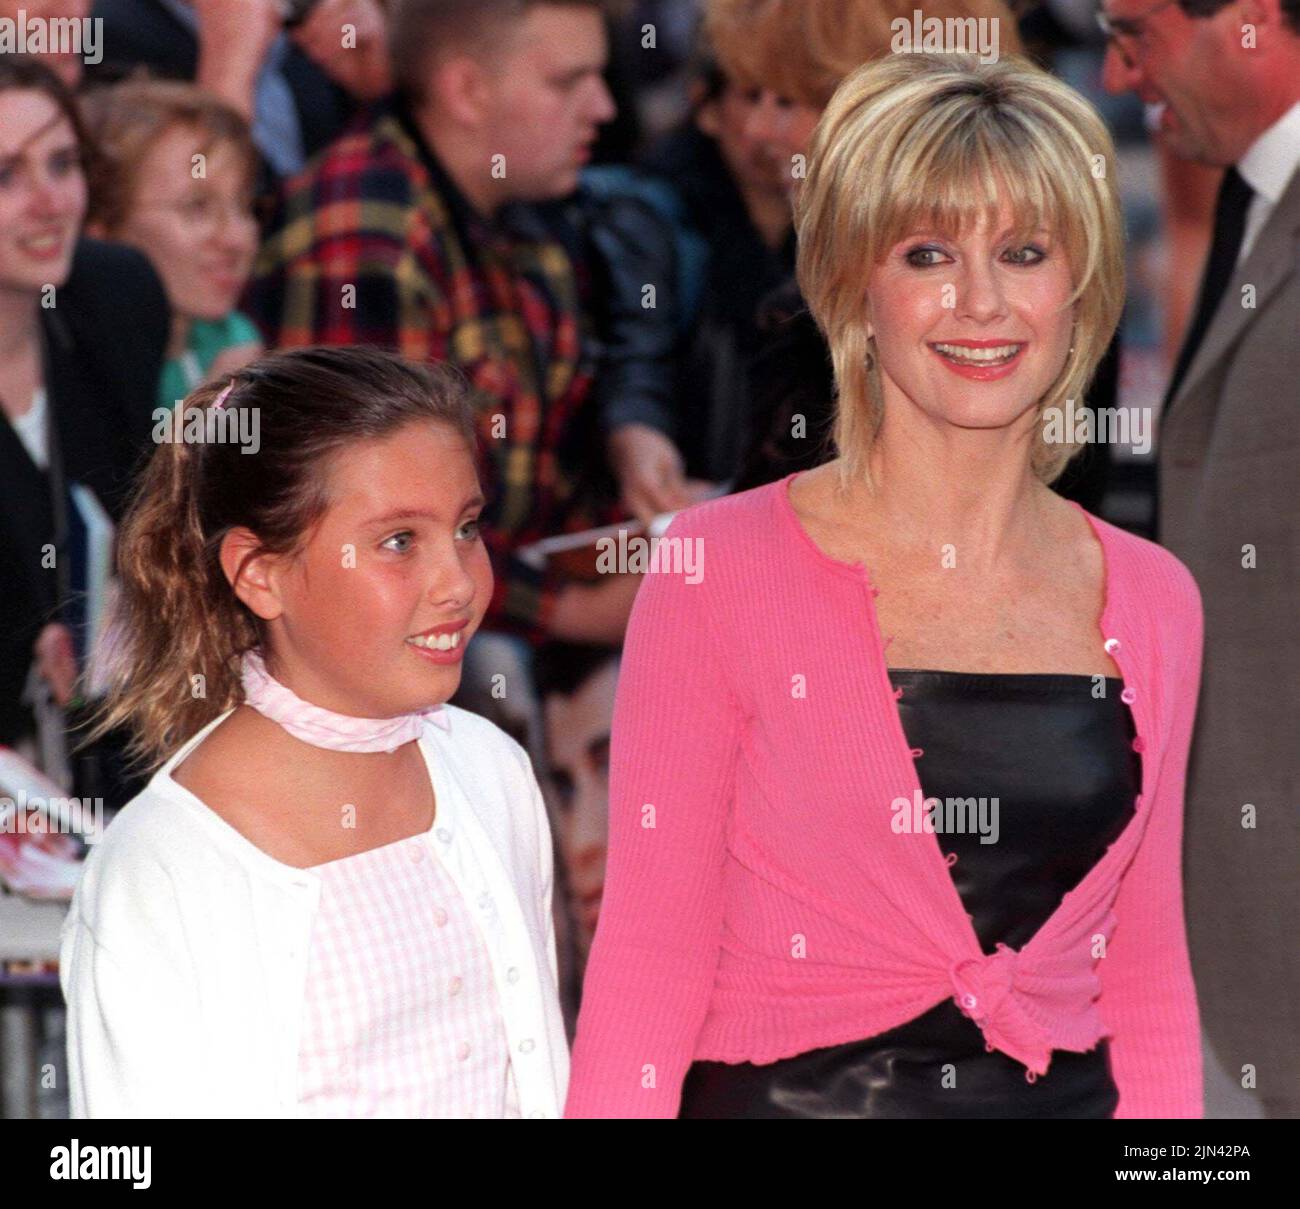 File photo dated 25/06/98 of Olivia Newton-John arrives with her daughter Chloe, for the premiere of the 20th anniversary re-issue of the musical Grease, at the Empire, Leicester Square, London. Dame Olivia Newton-John has died at the age of 73, her widower has confirmed. The British-born singer died "peacefully" at her ranch in Southern California on Monday morning, surrounded by family and friends. Issue date: Tuesday August 9, 2022. Stock Photo